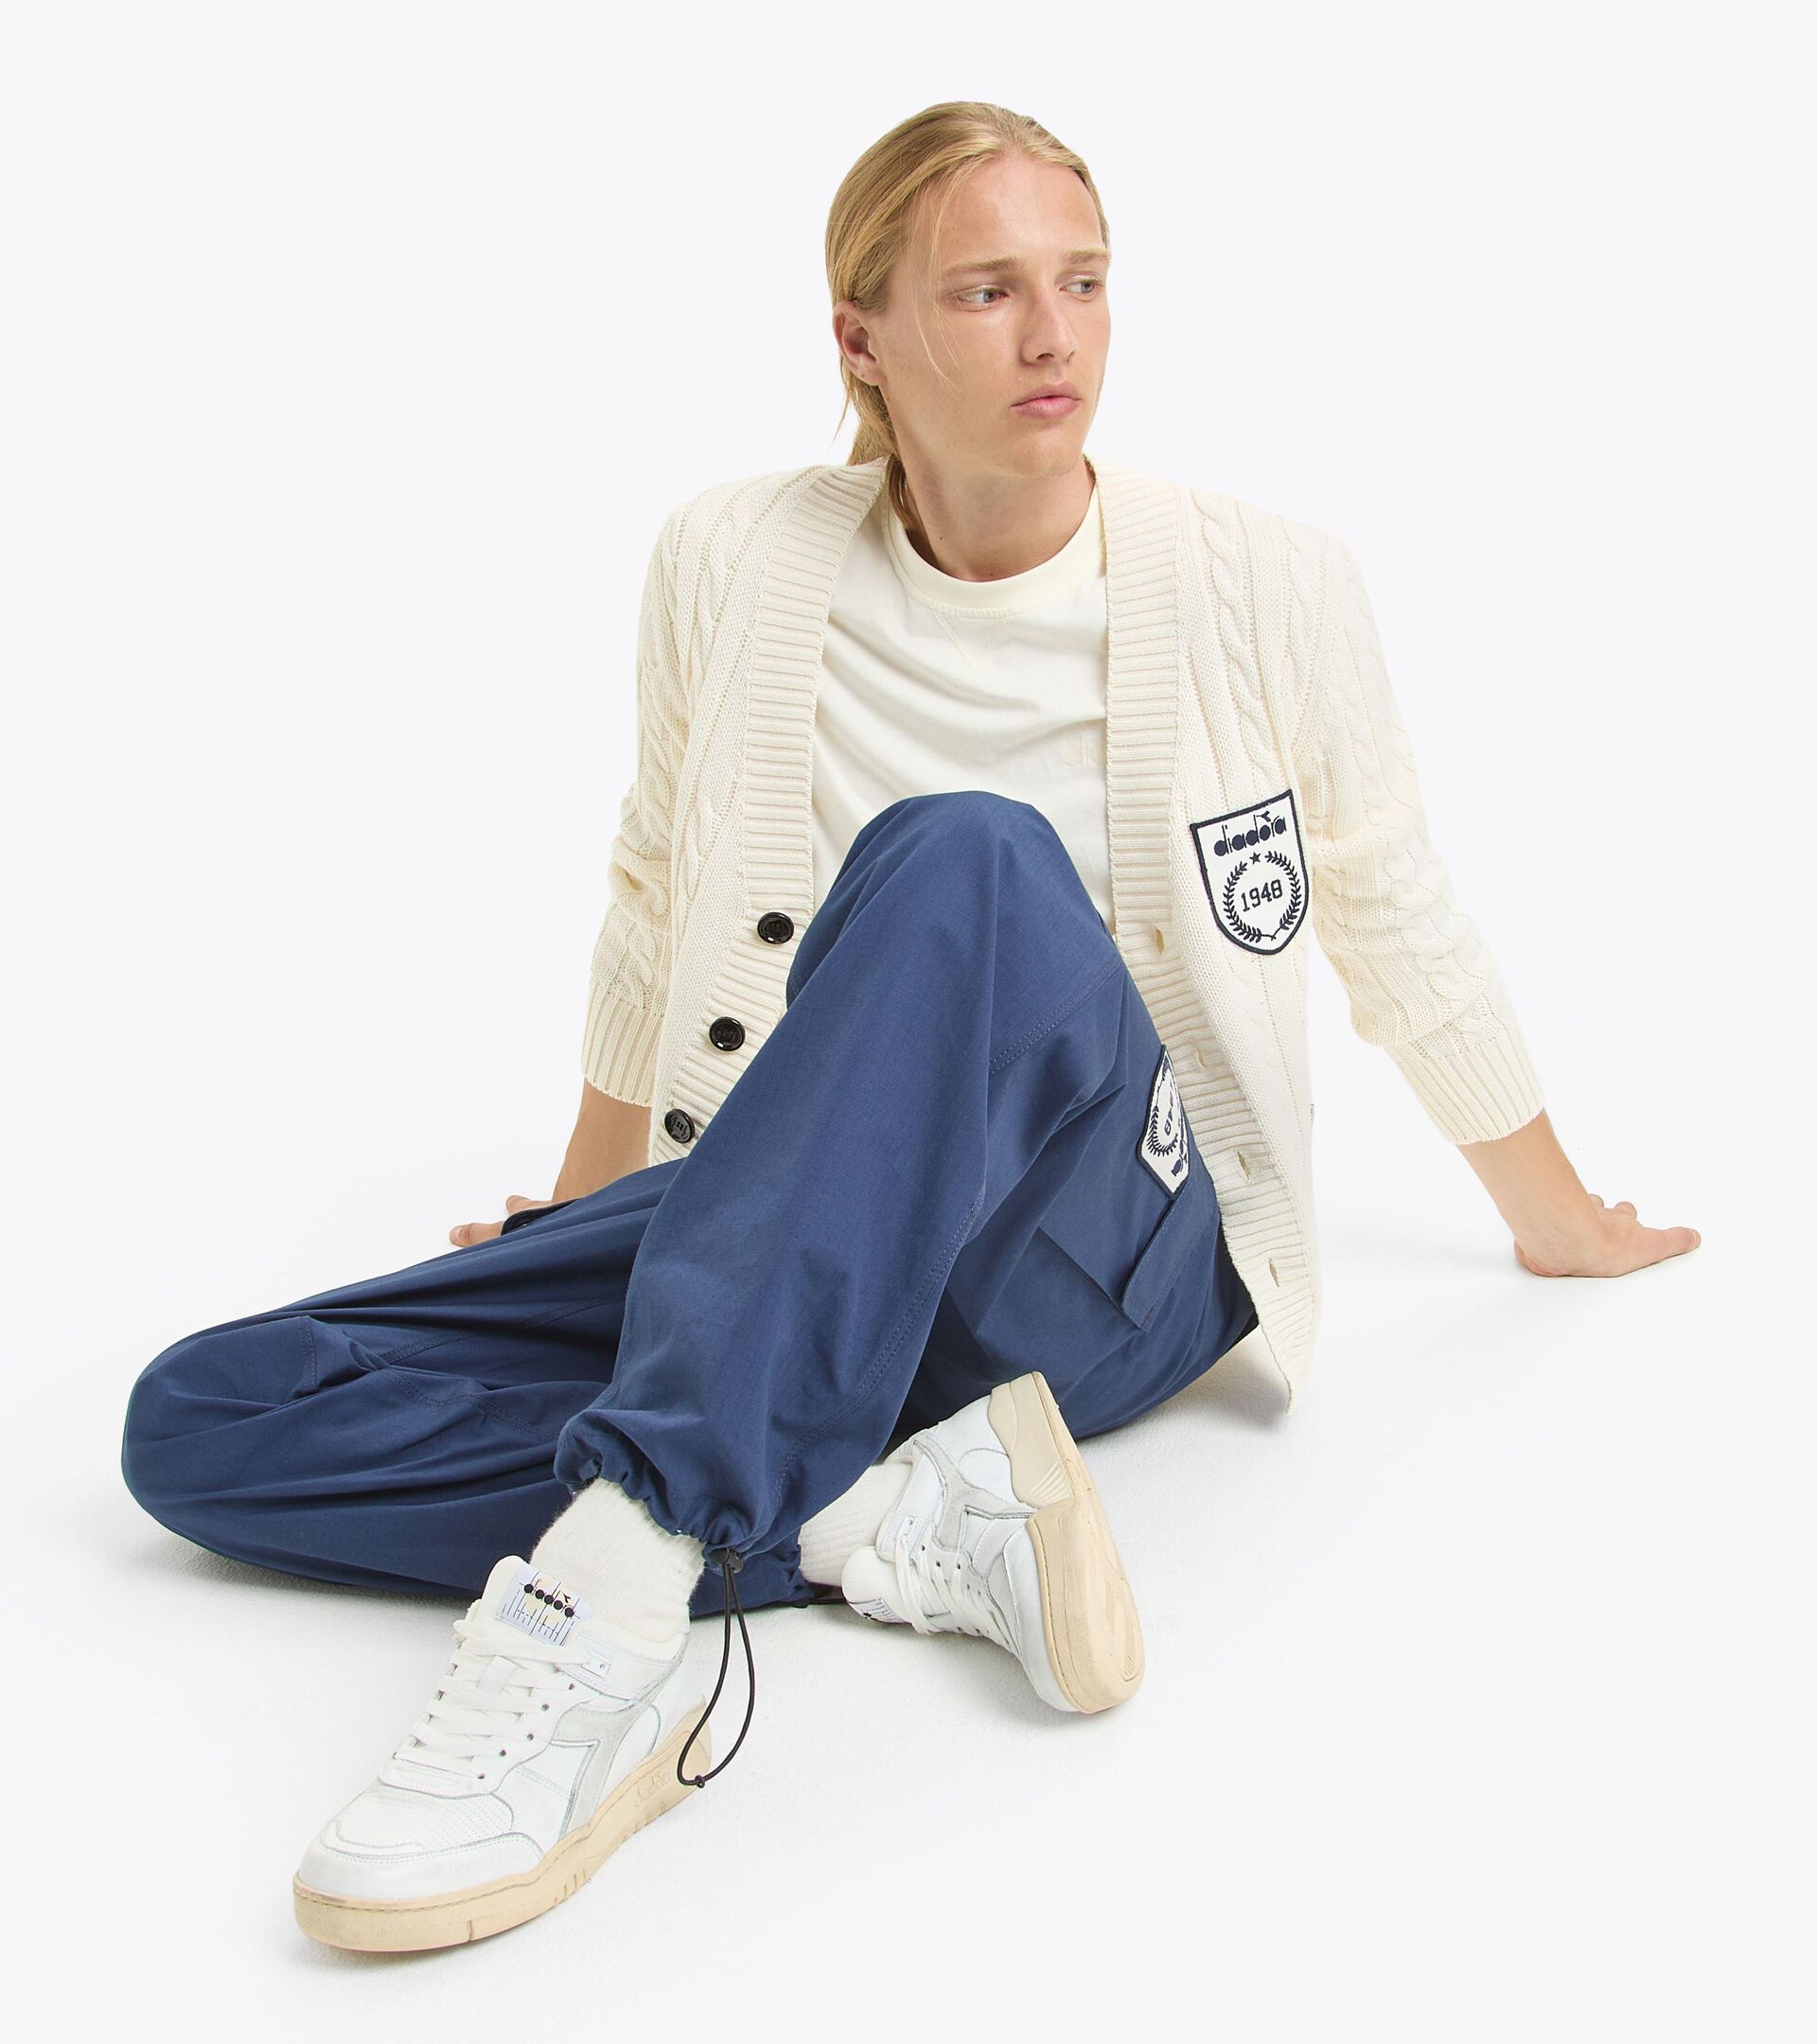 Cardigan – Made in Italy - Gender Neutral CARDIGAN LEGACY VANILLE EIS WEISS - Diadora